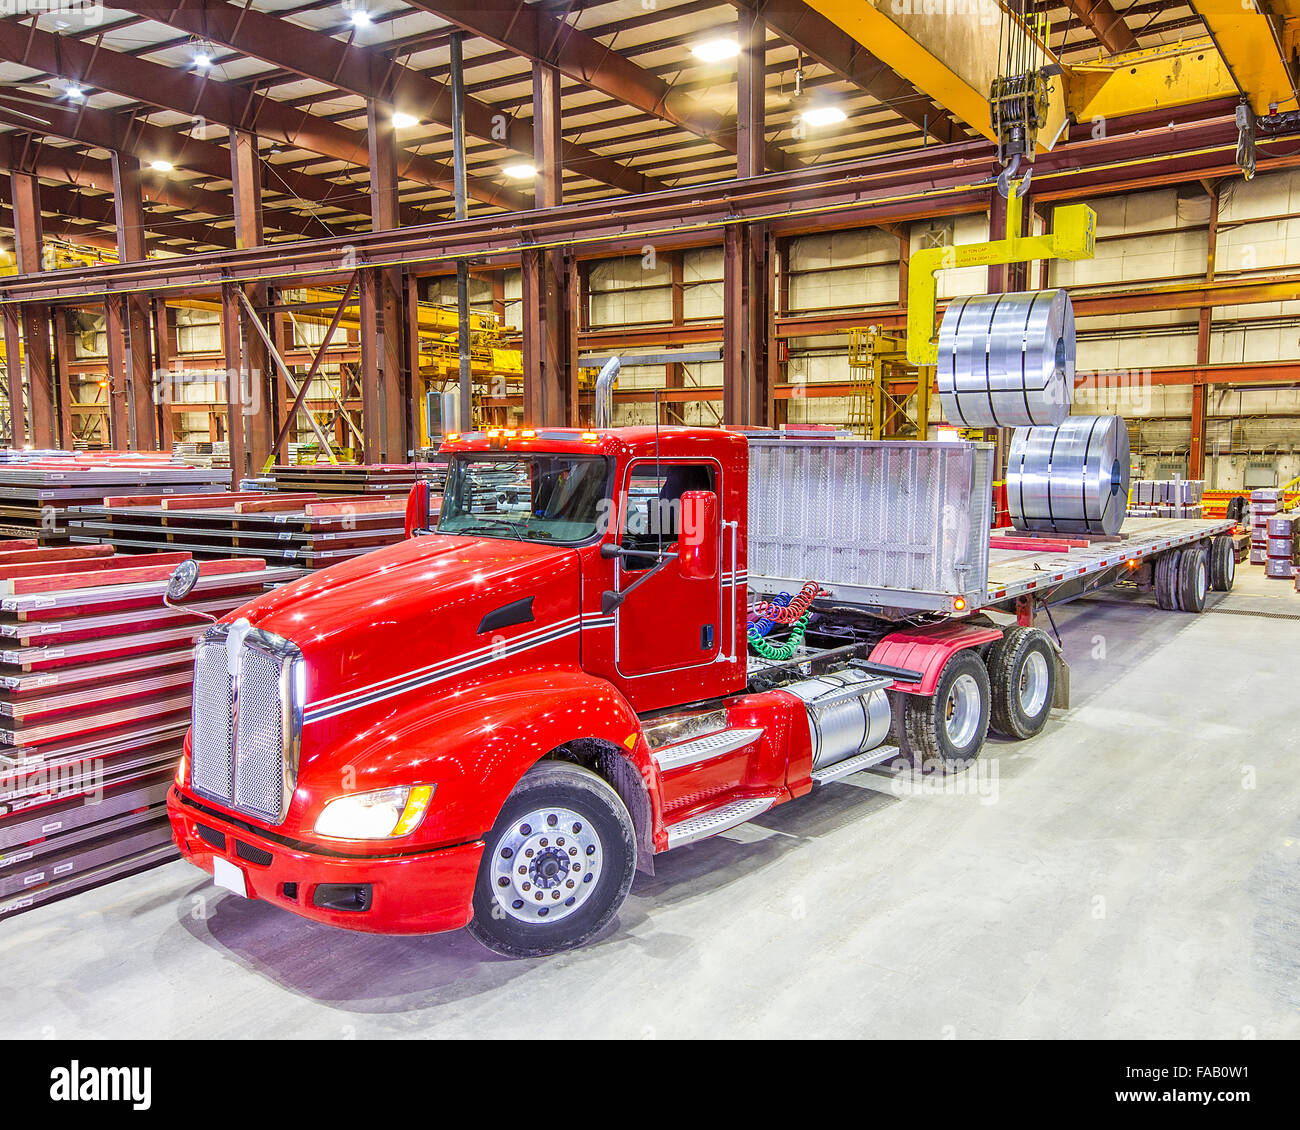 Red semi tractor trailer truck being loaded with roll formed steel coils - inside bay lit up with ceiling lights Stock Photo